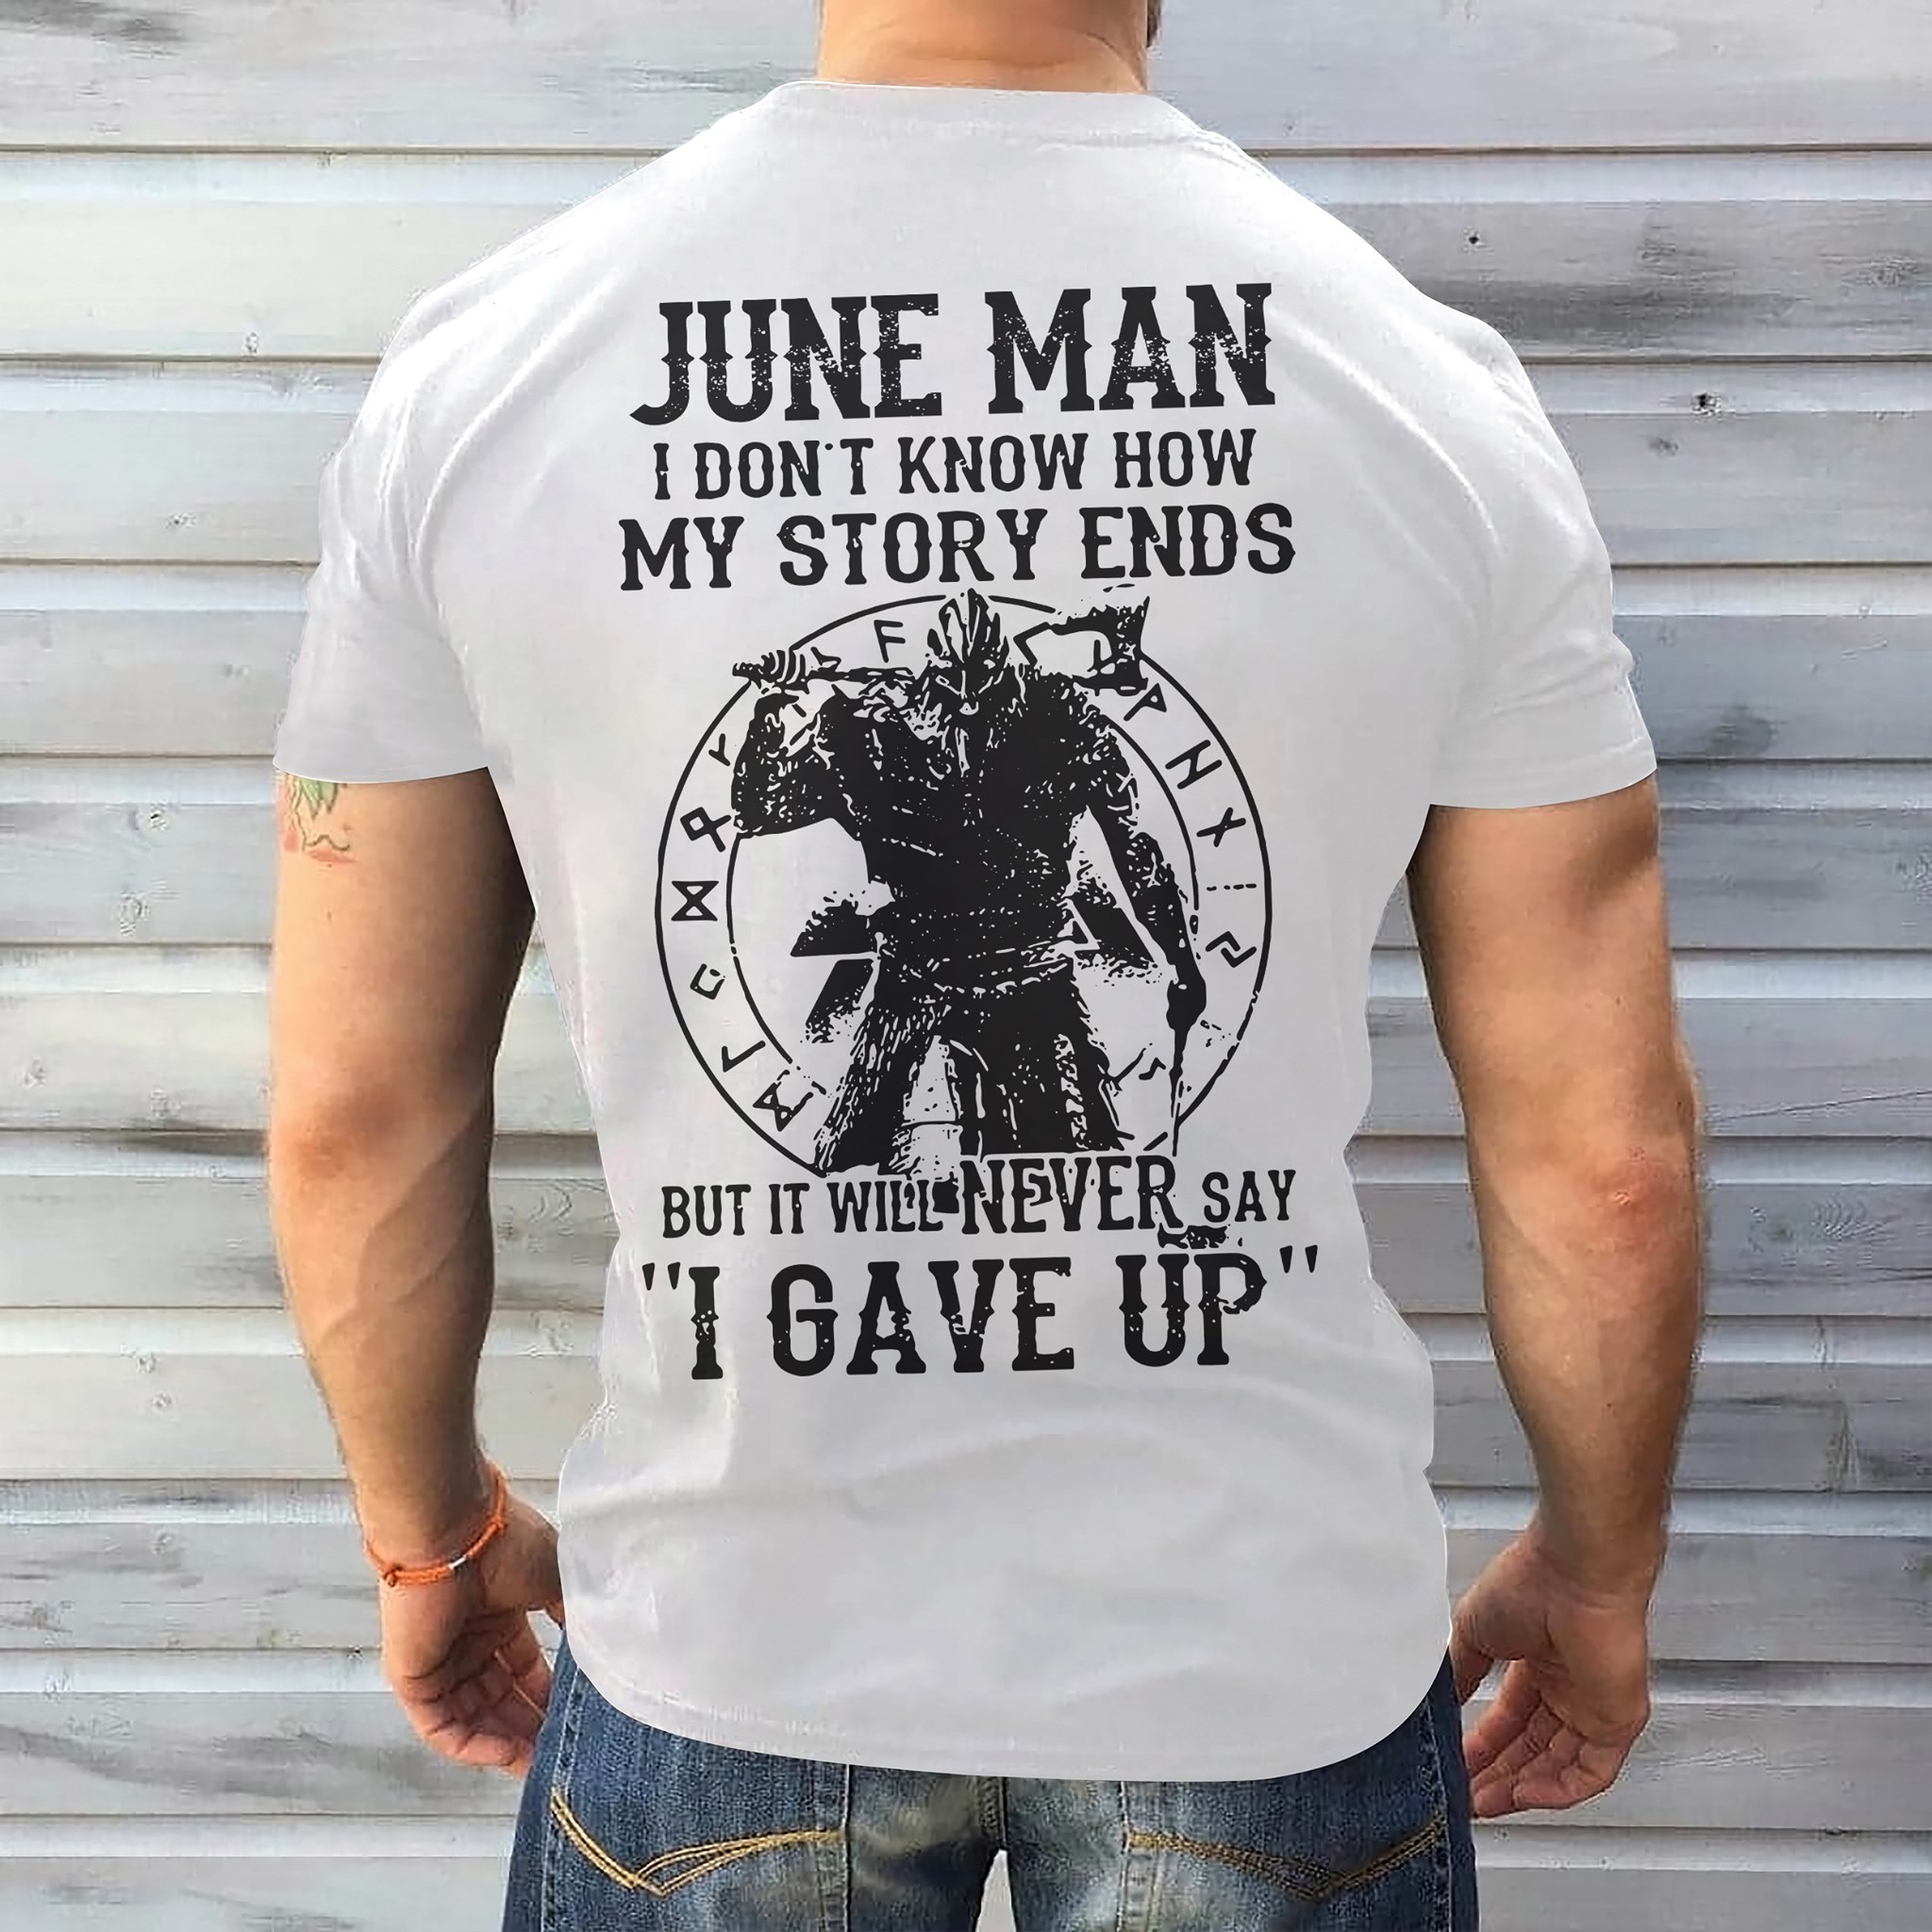 June man I don't know how my story ends but It will never say I gave up - Viking guy